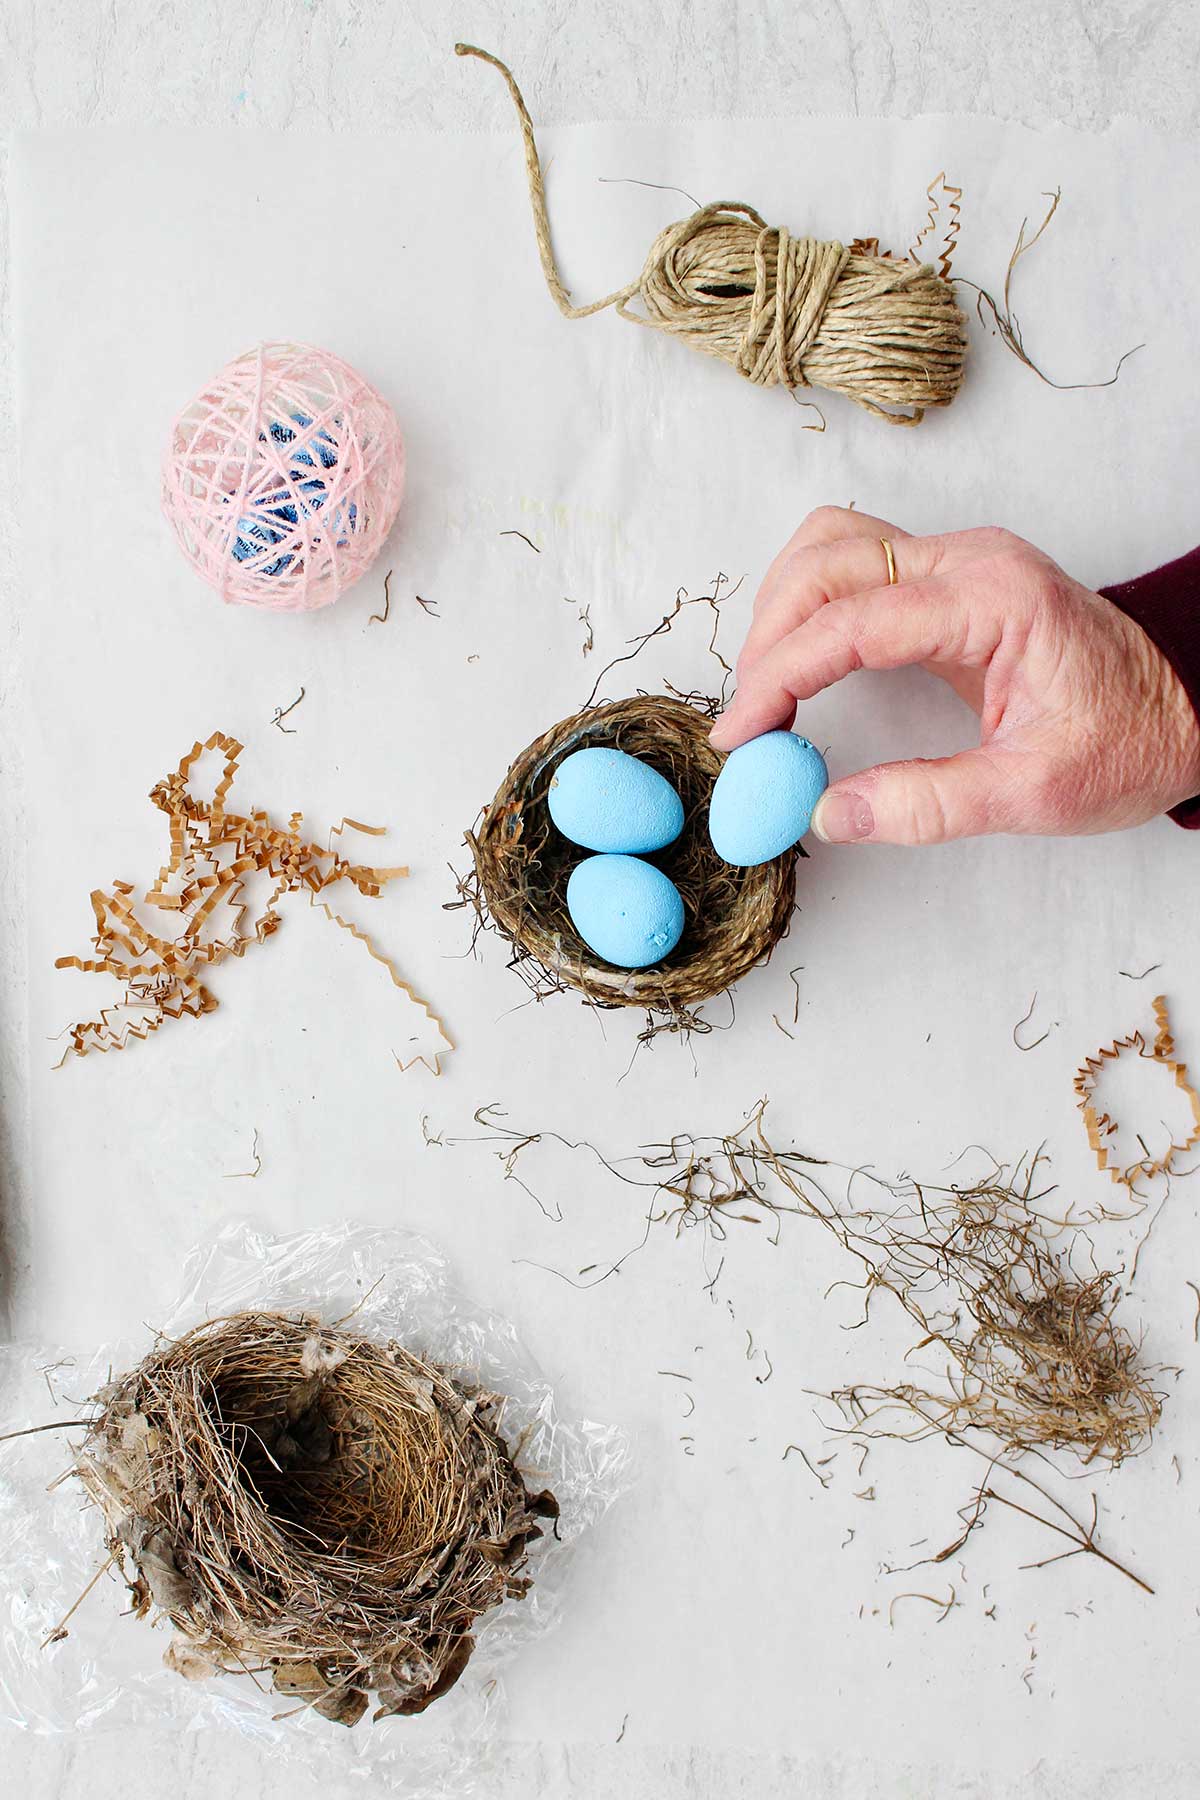 Hand placing a blue egg in the natural brown bird nest made of string.